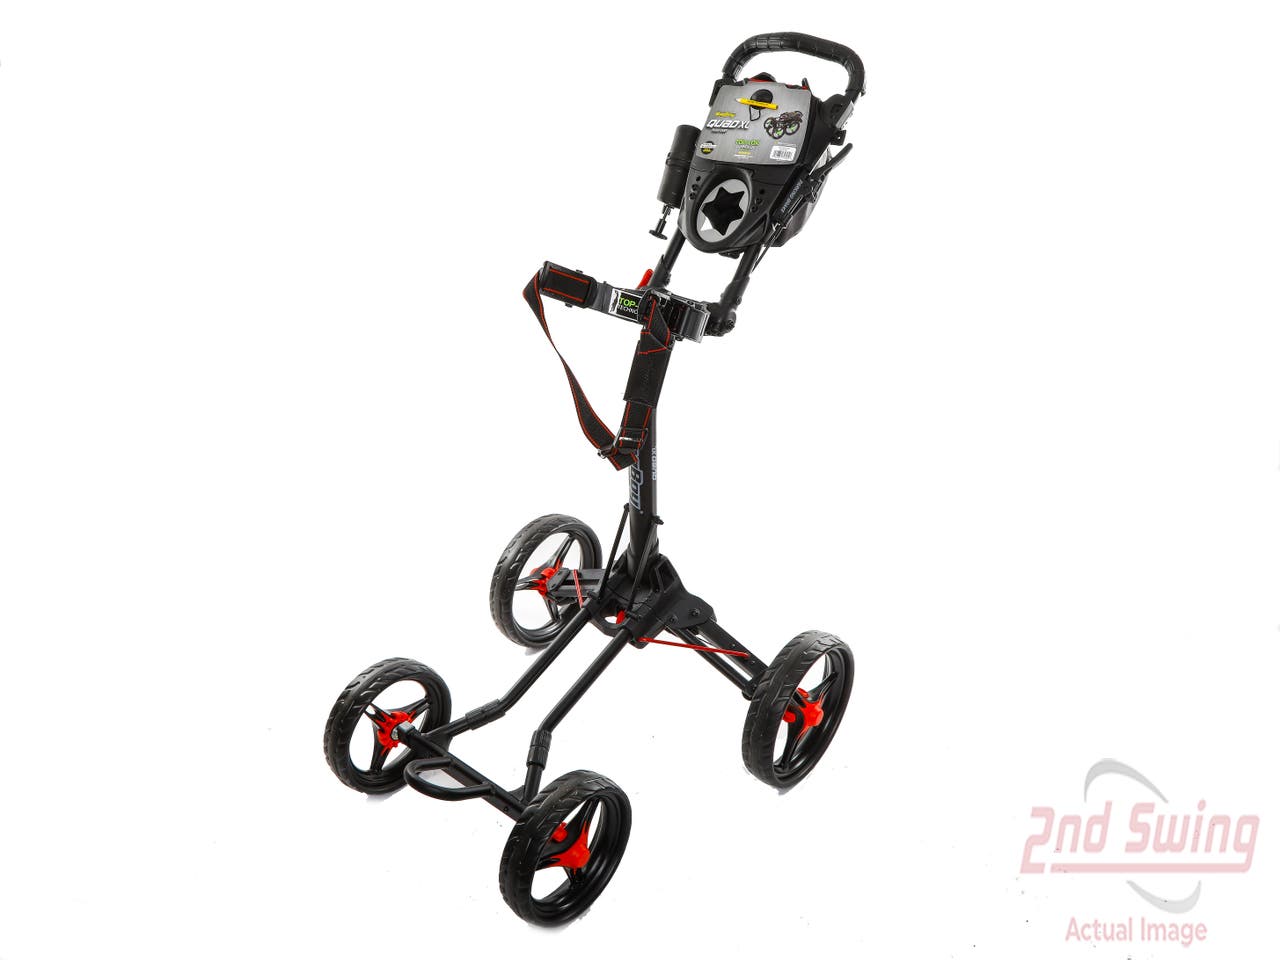 Brand New Bag Boy Quad XL Push and Pull Cart Matte Black/Red Ships Today!